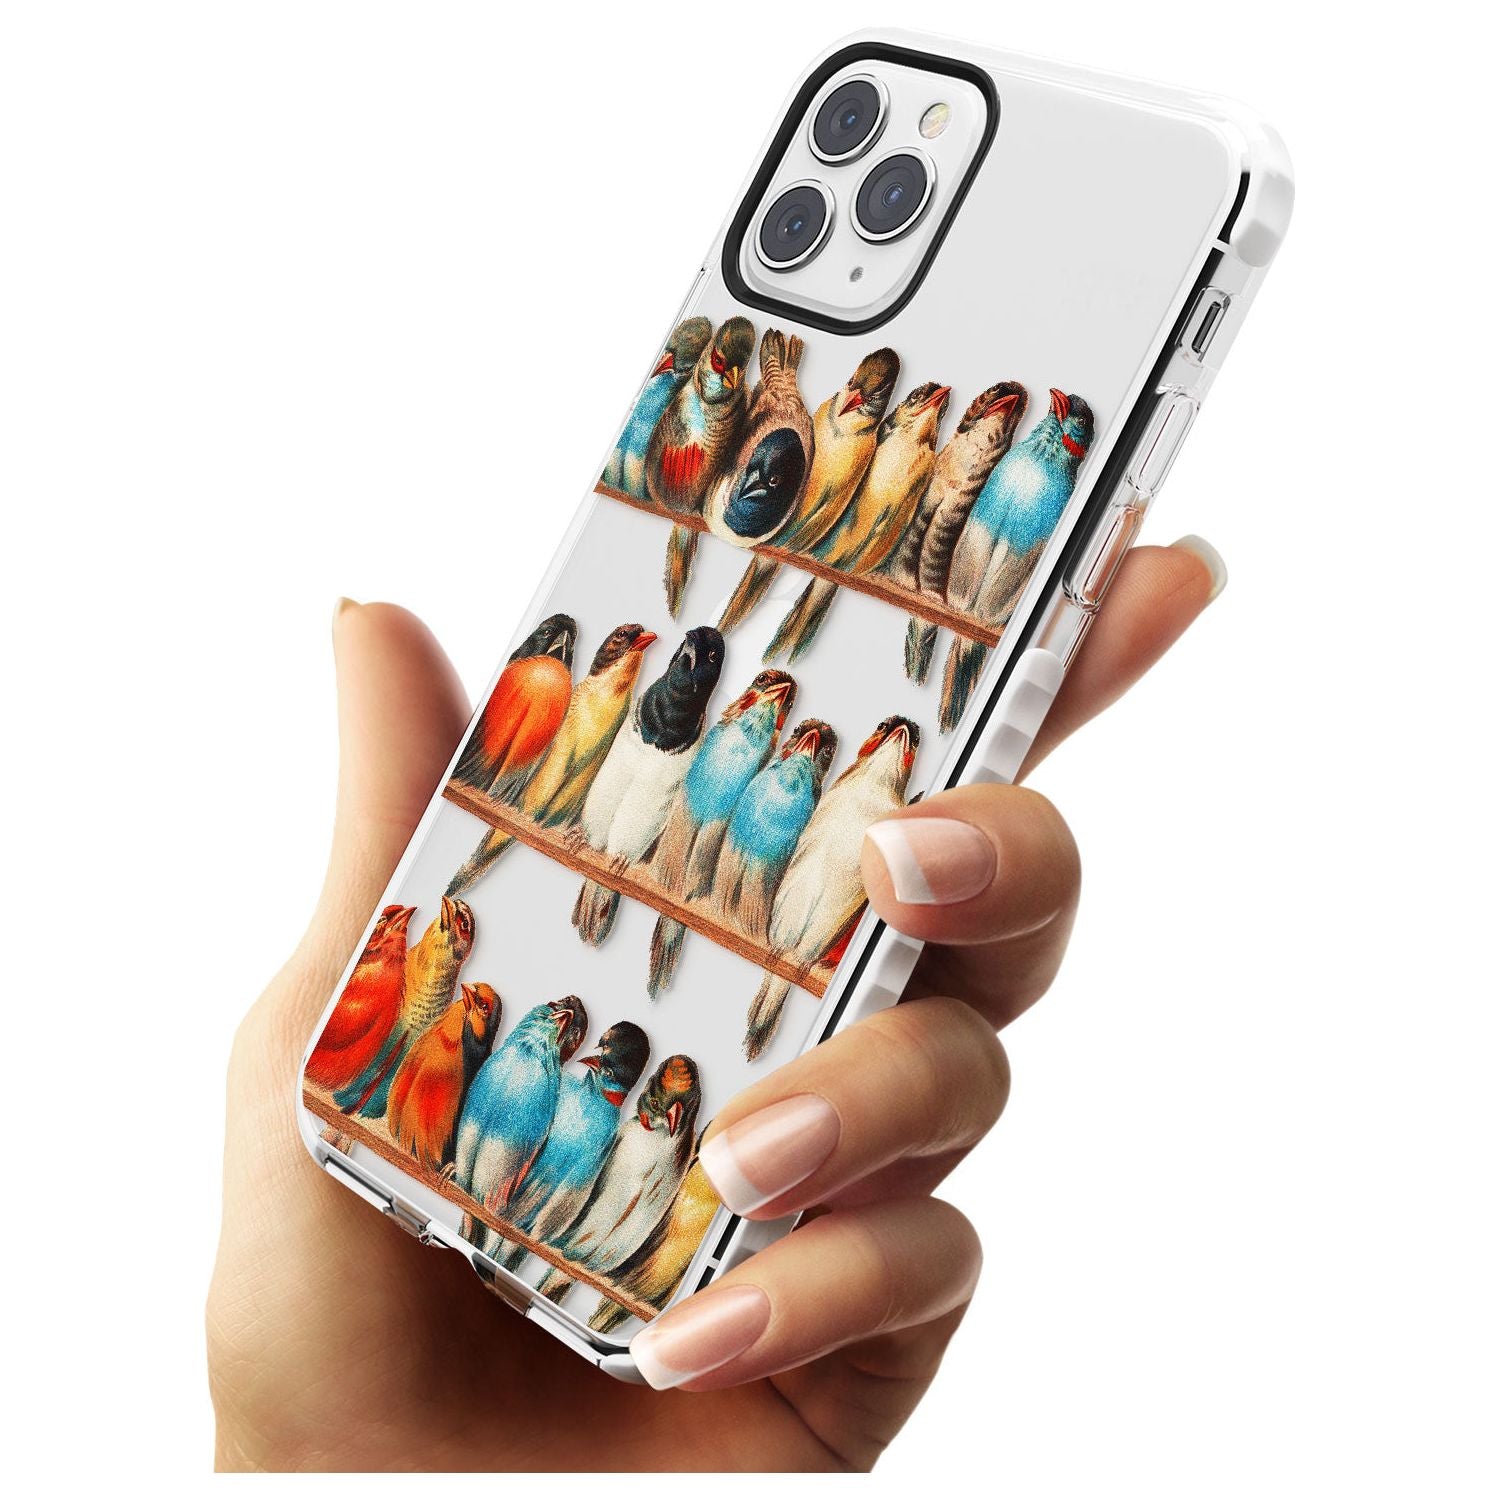 A Perch of Birds Impact Phone Case for iPhone 11 Pro Max